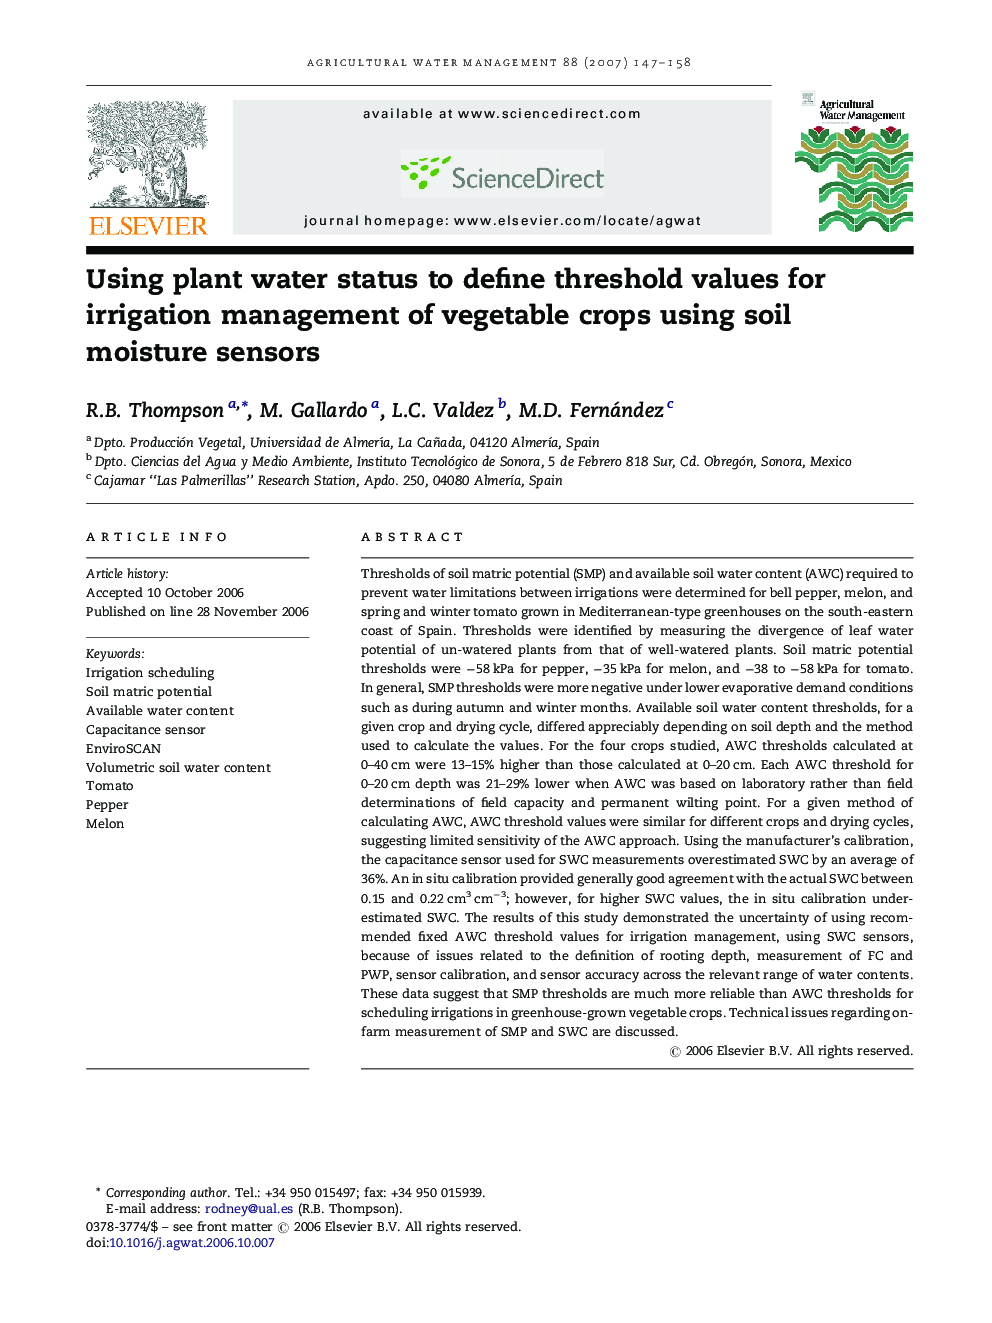 Using plant water status to define threshold values for irrigation management of vegetable crops using soil moisture sensors